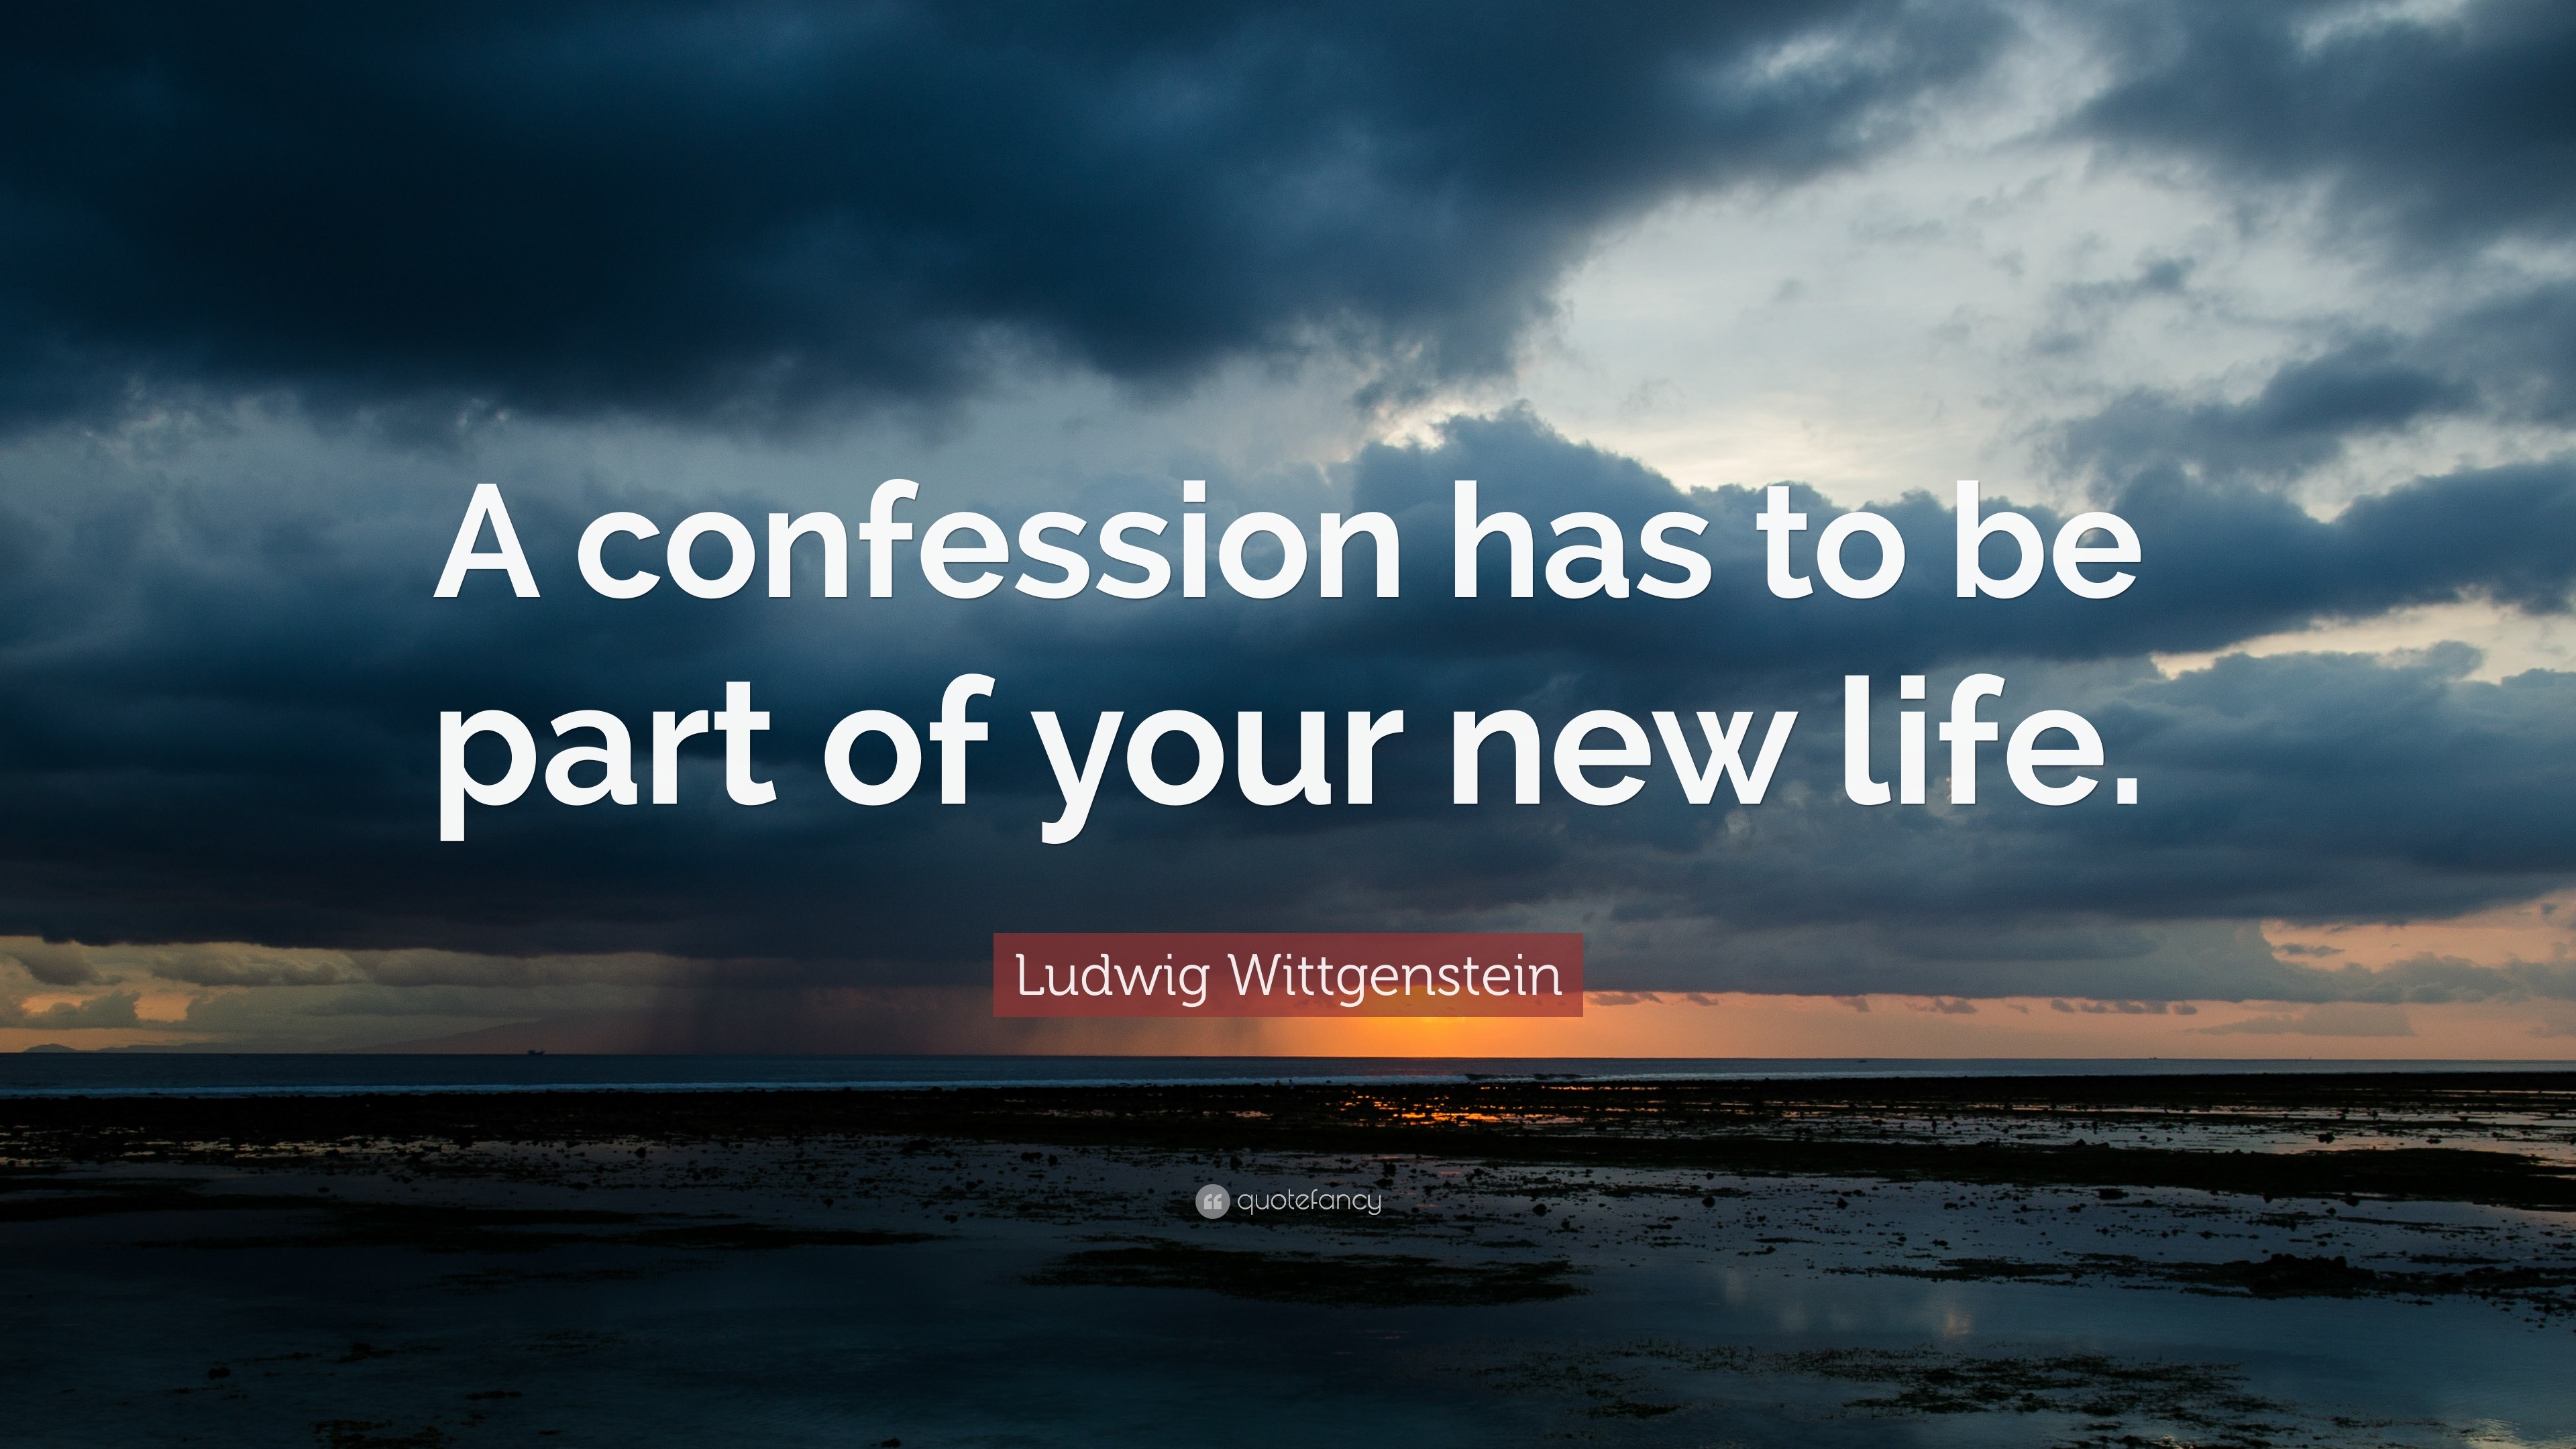 Ludwig Wittgenstein Quote “A confession has to be part of your new life